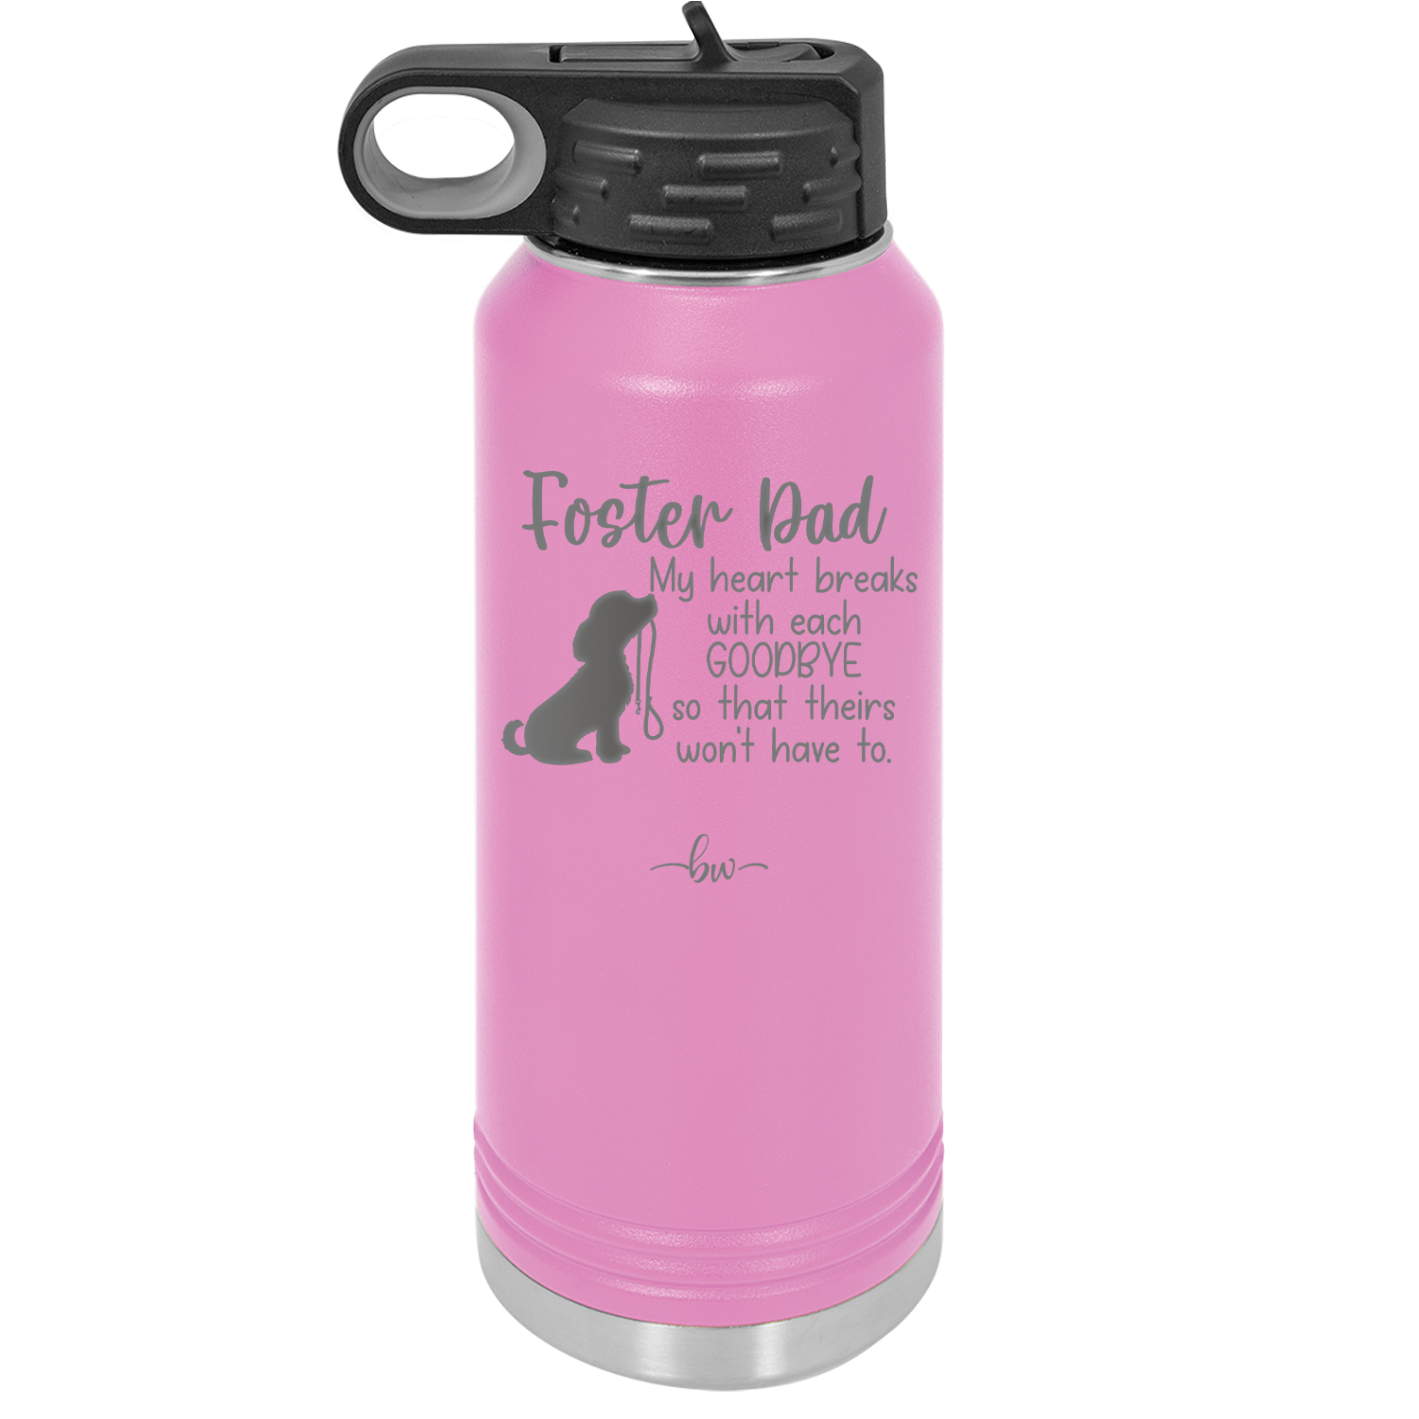 Foster Dad My Heart Breaks with Each Goodbye (Dog) - Laser Engraved Stainless Steel Drinkware - 2373 -